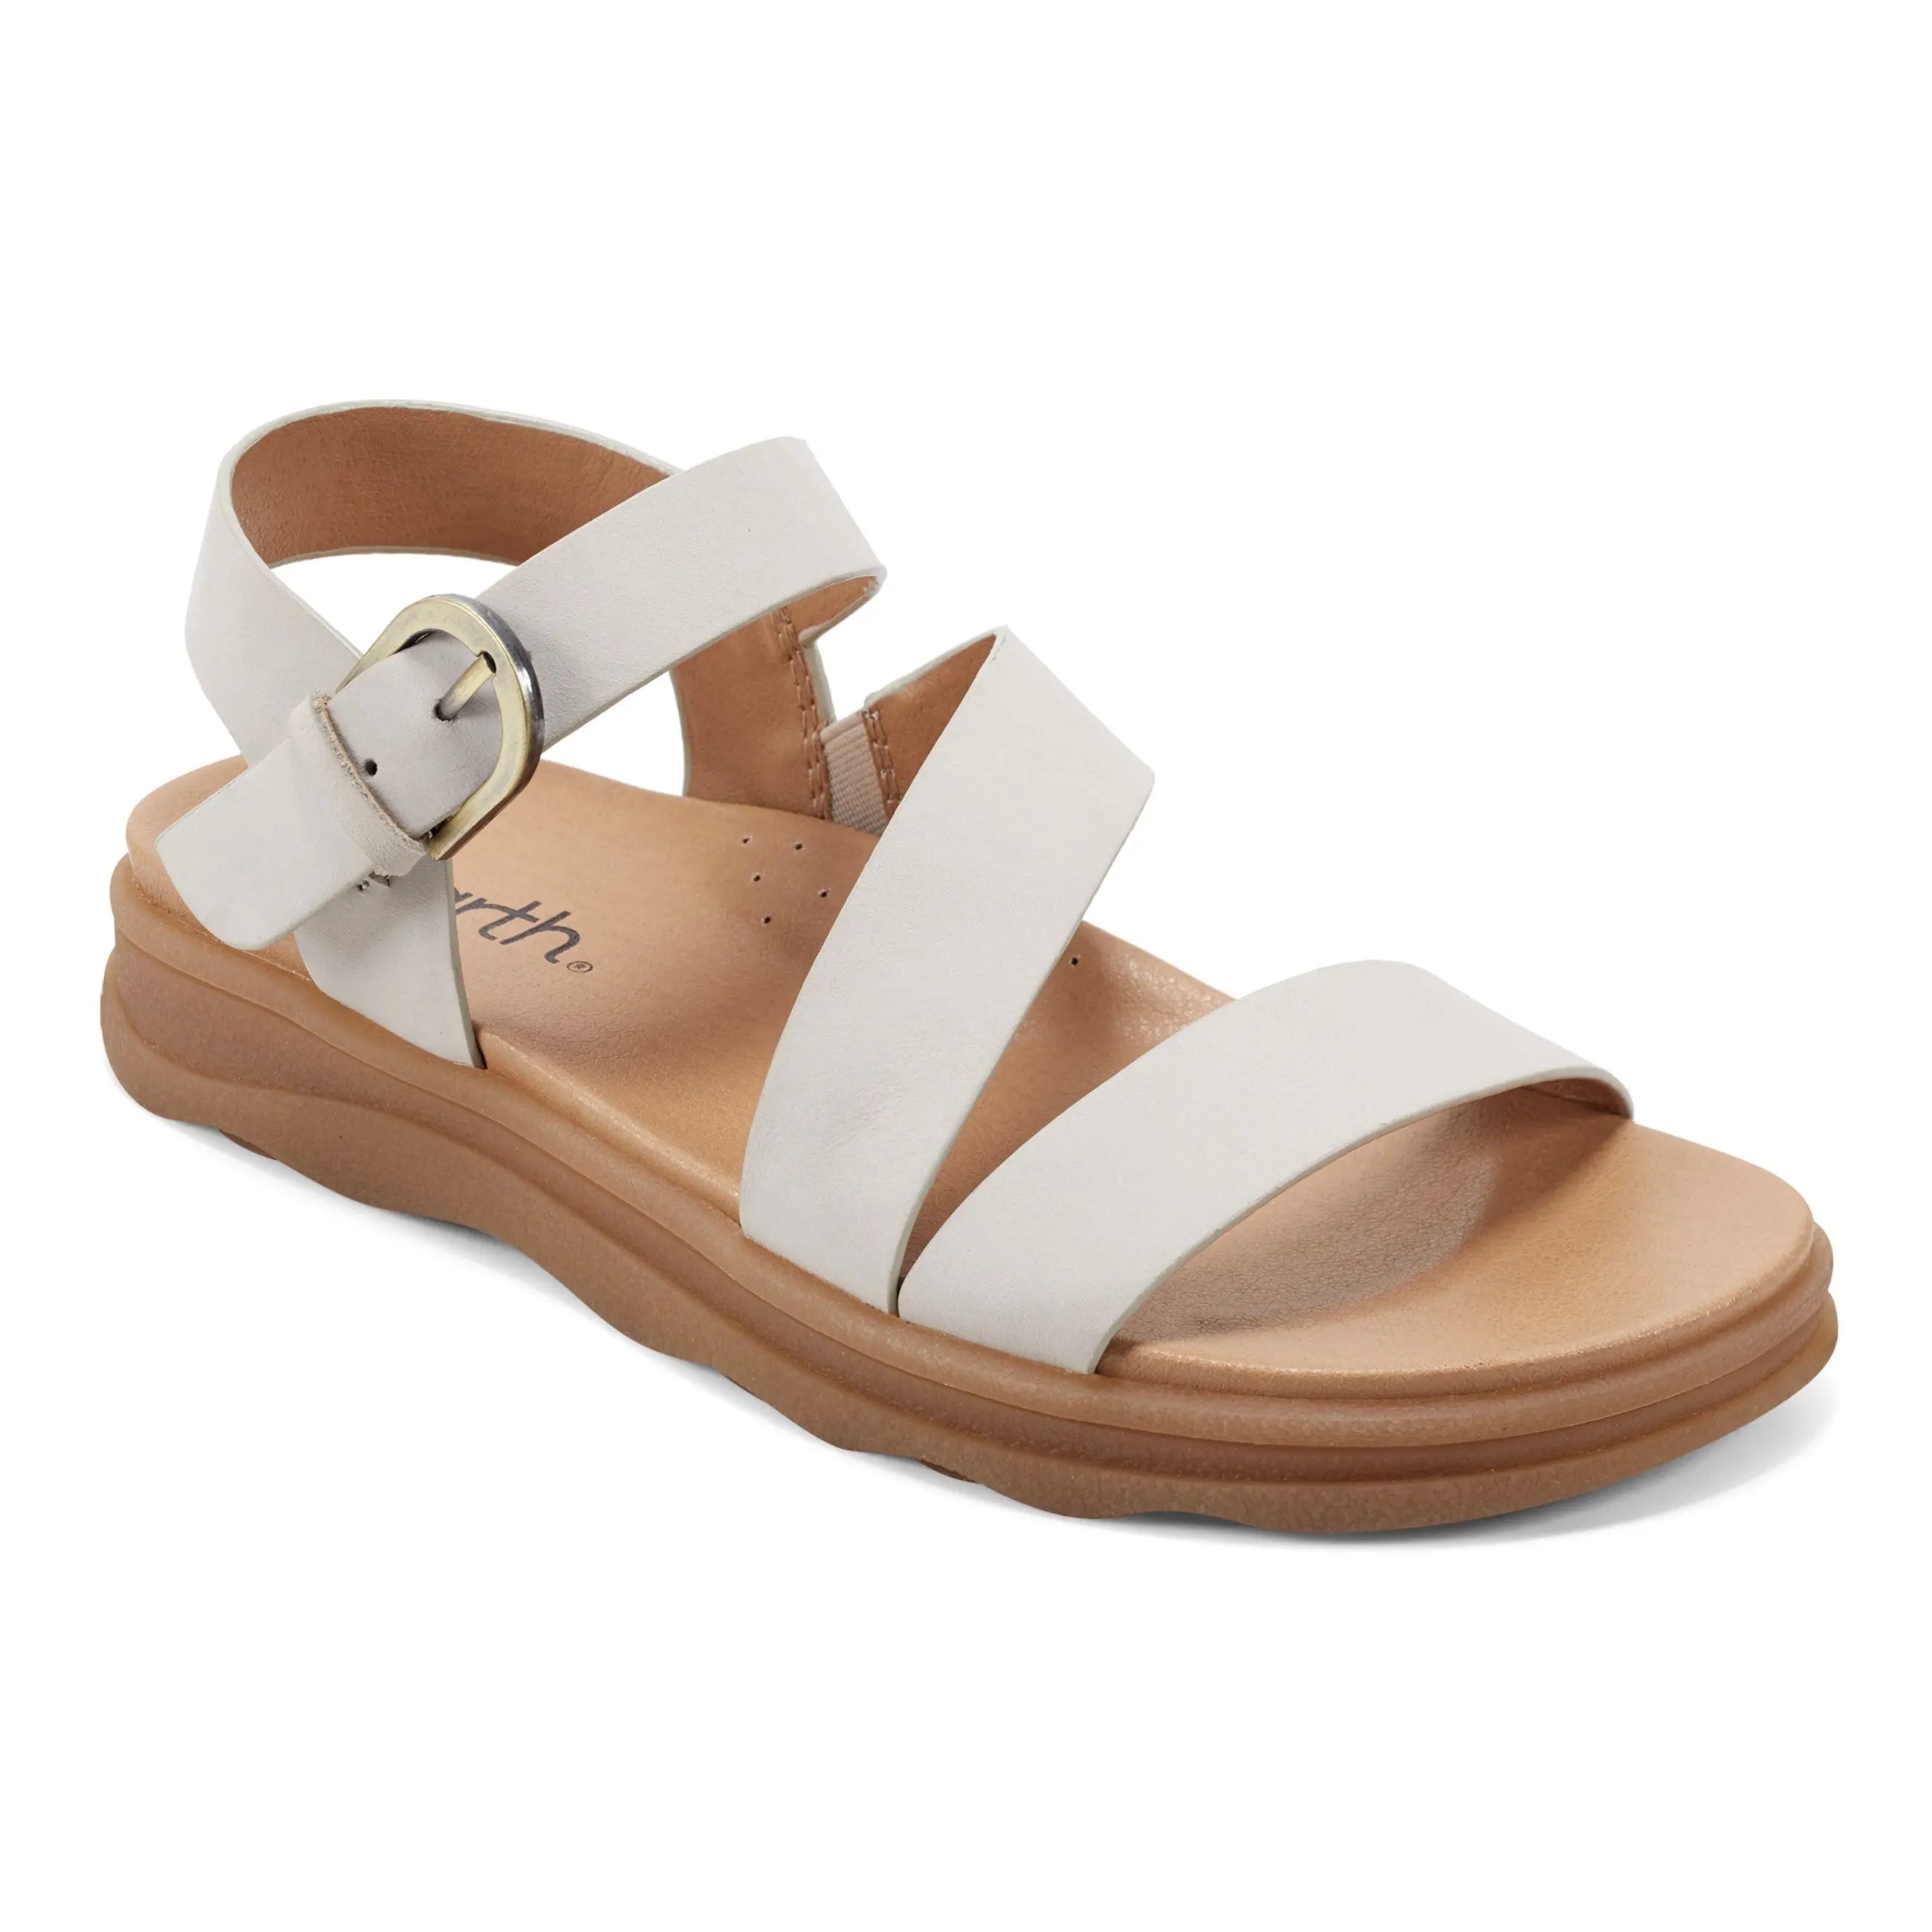 Lainey Casual Strappy Round Toe Flat Sandals